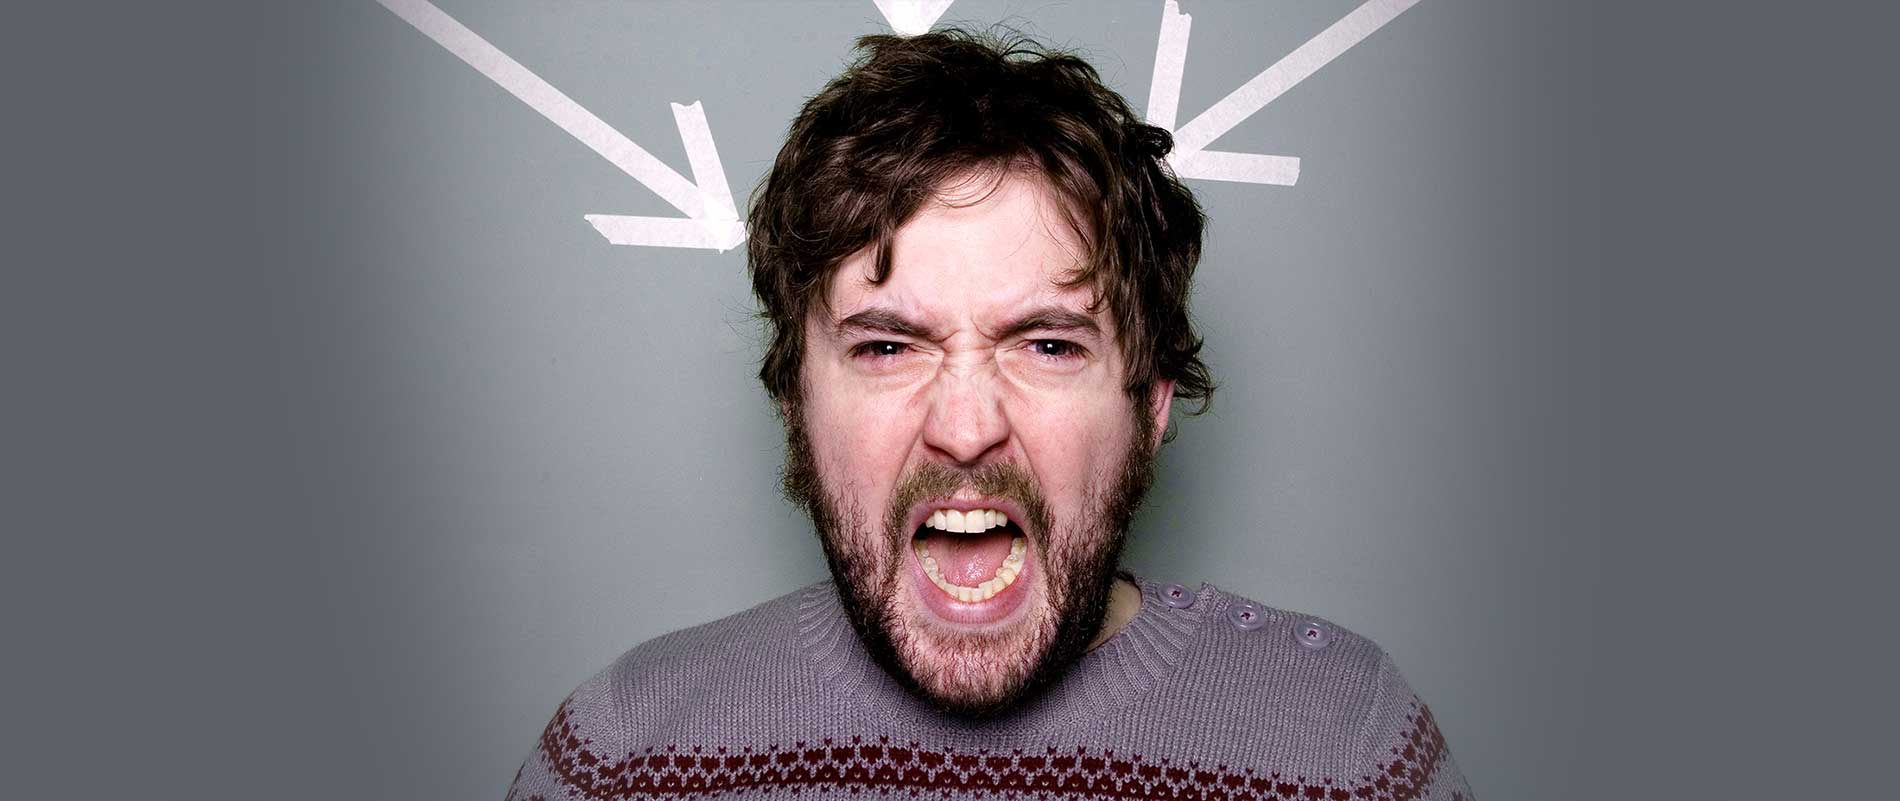 Nick Helm on the menu for Dave